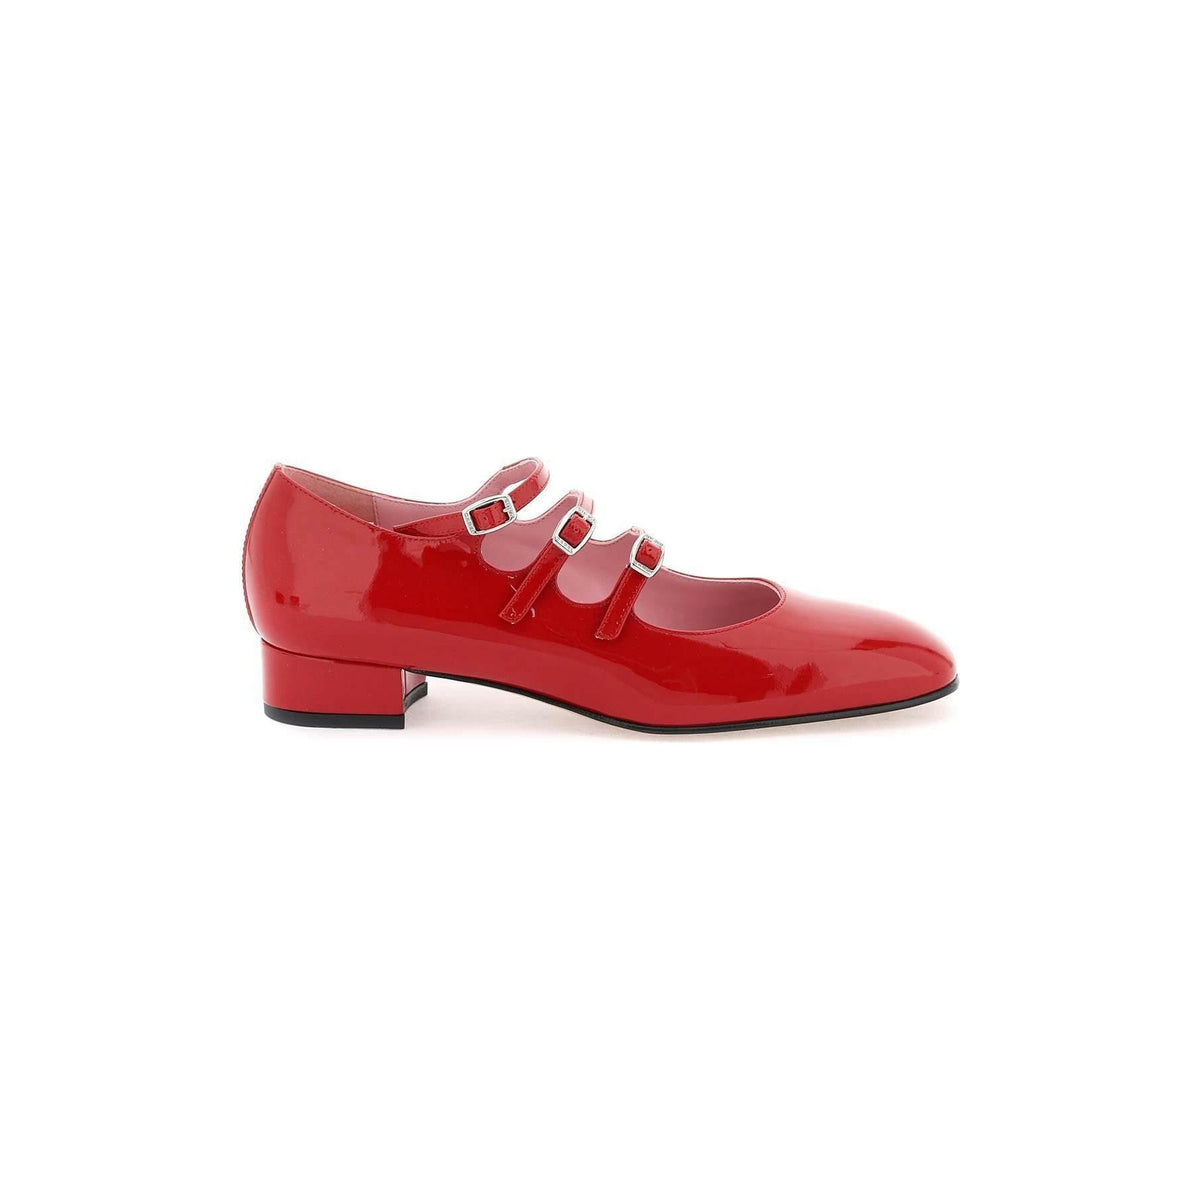 Red Ariana Patent Leather Mary Jane Pumps CAREL JOHN JULIA.